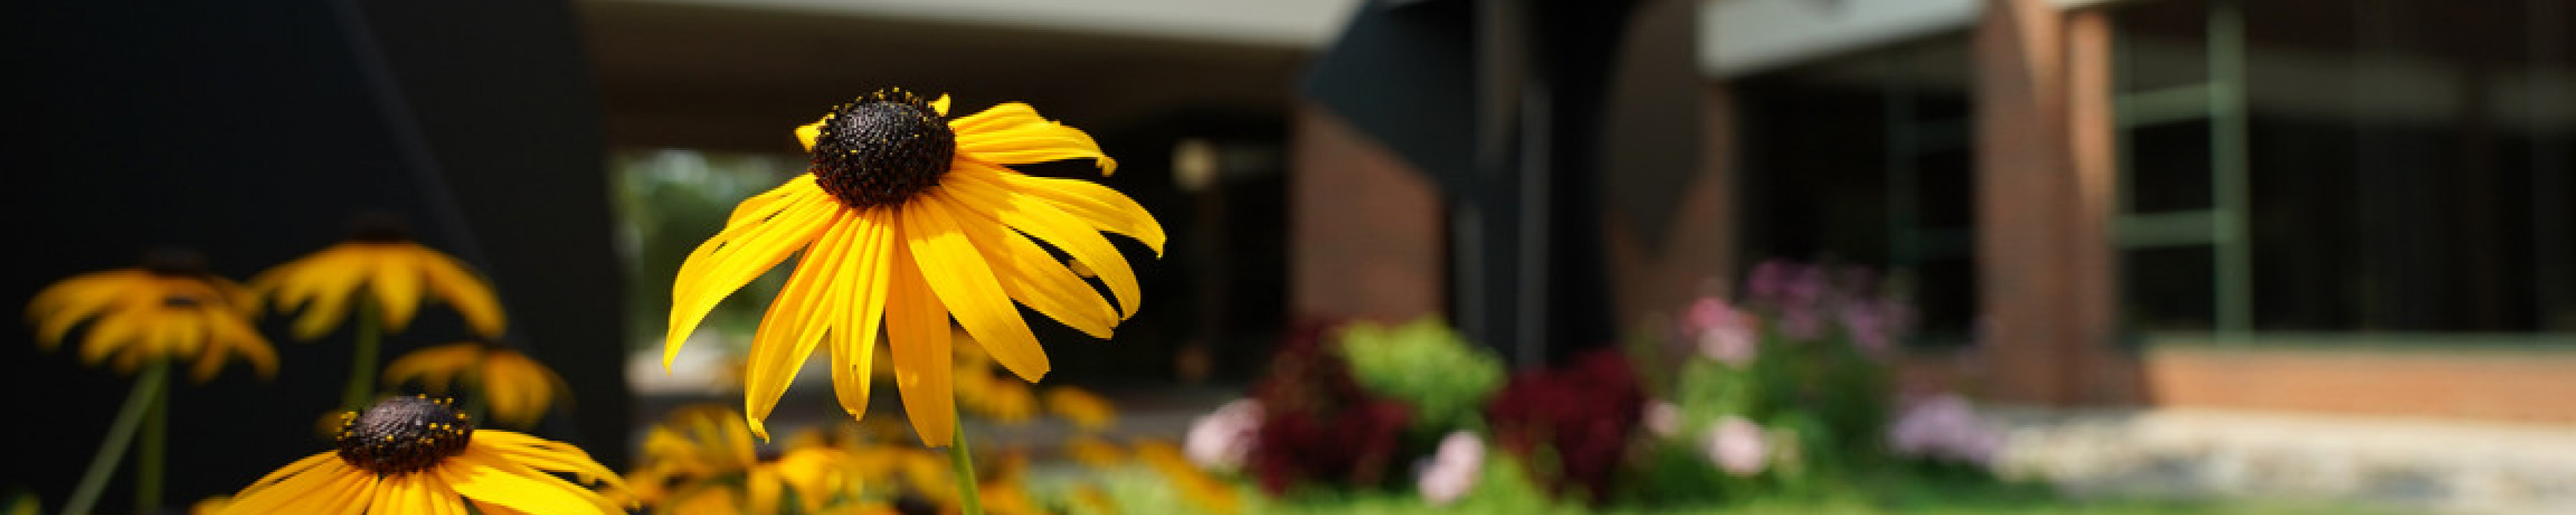 Black-eyed Susans are blooming outside the Haworth College of Business